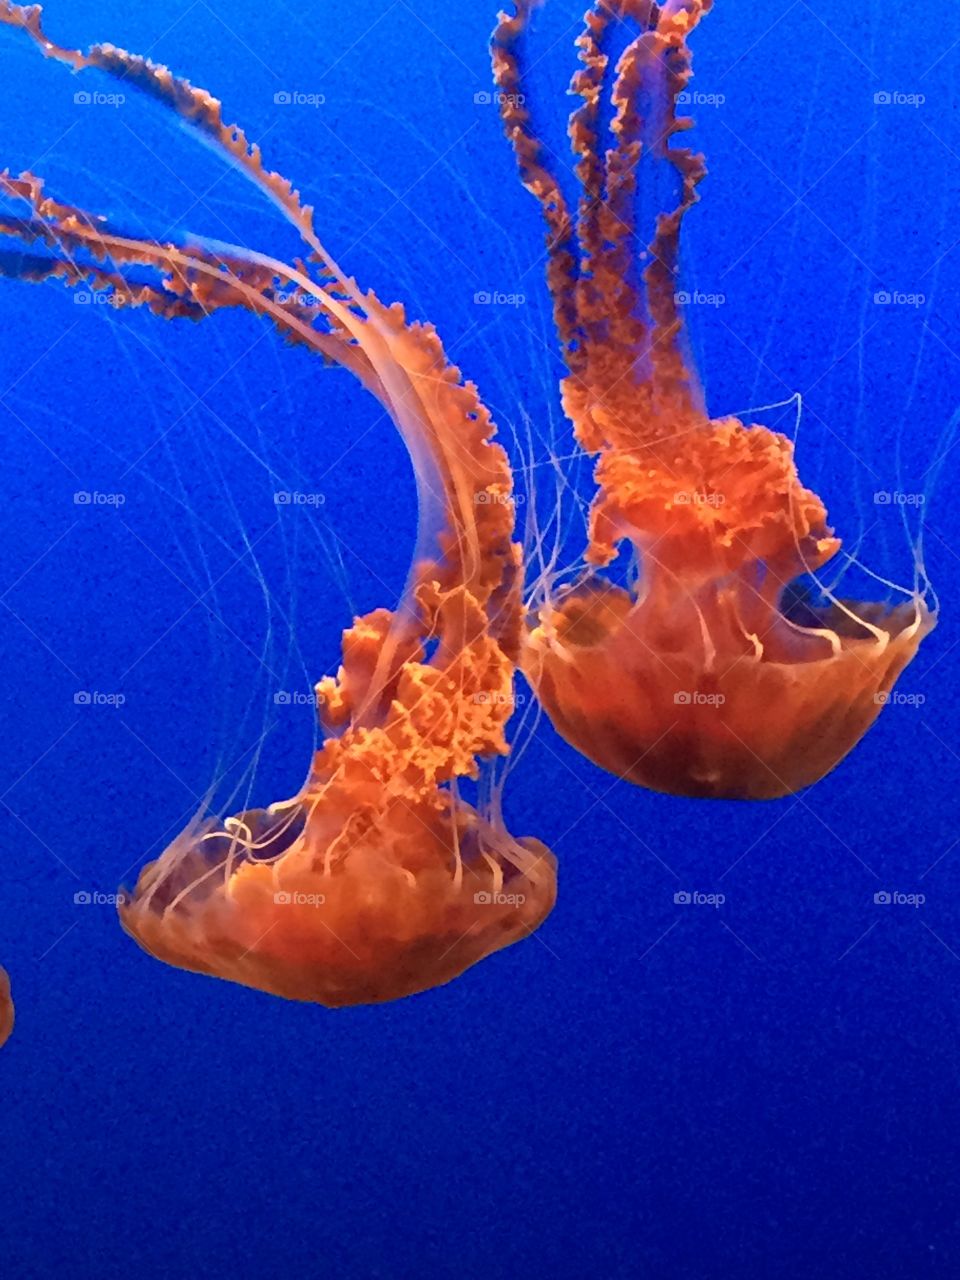 Grace and beauty contrast with danger in these jellies.